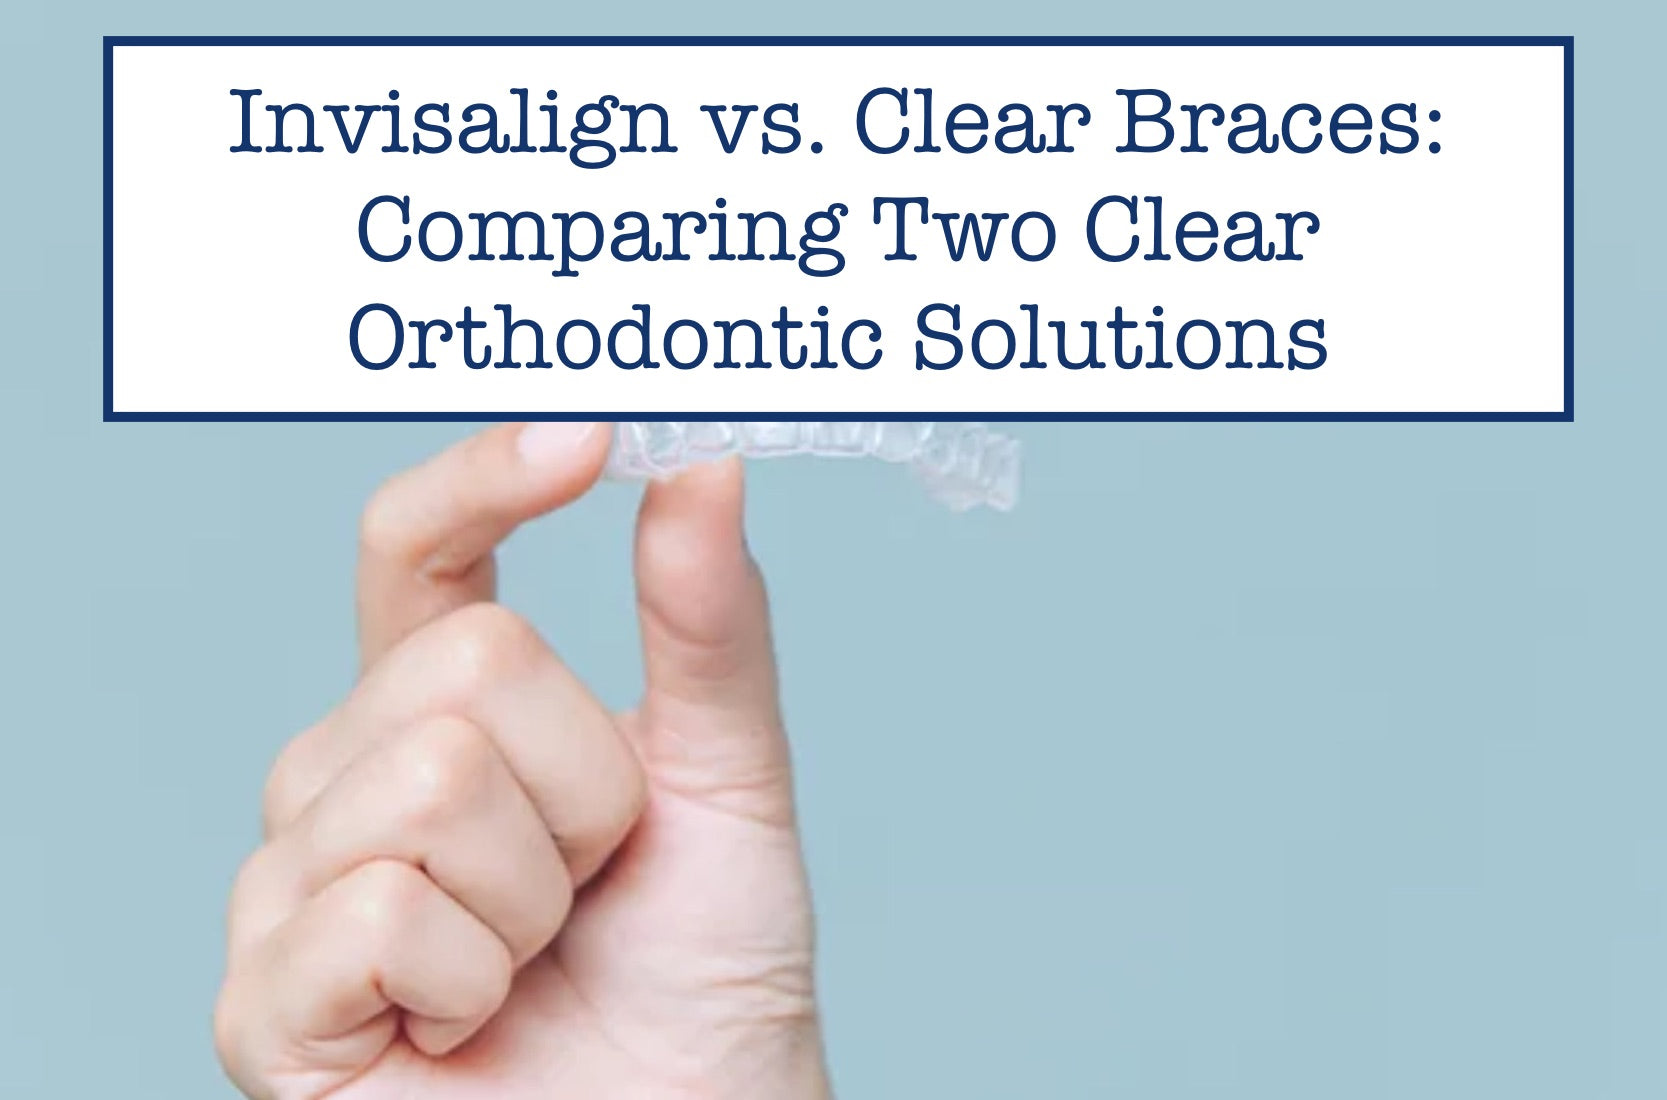 Invisalign vs. Clear Braces: Comparing Two Clear Orthodontic Solutions